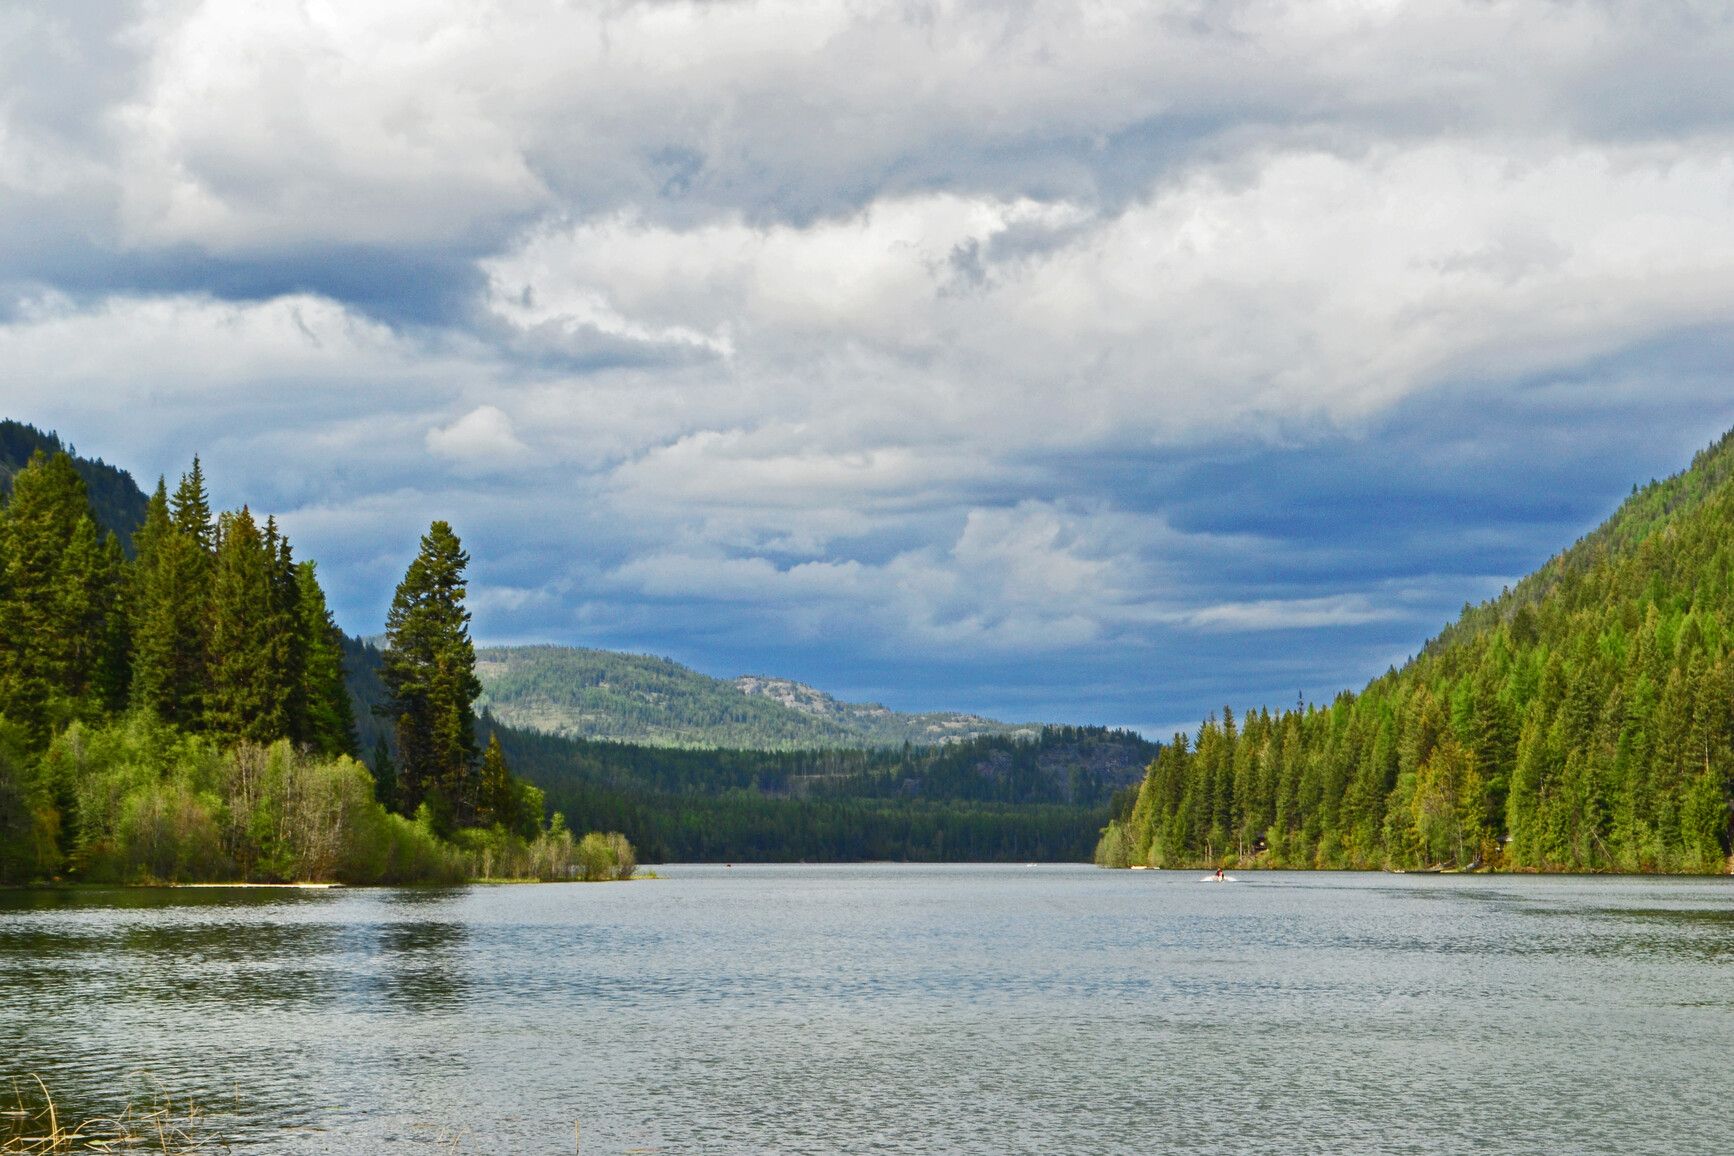 Forest covered mountains surround Jewel Lake.